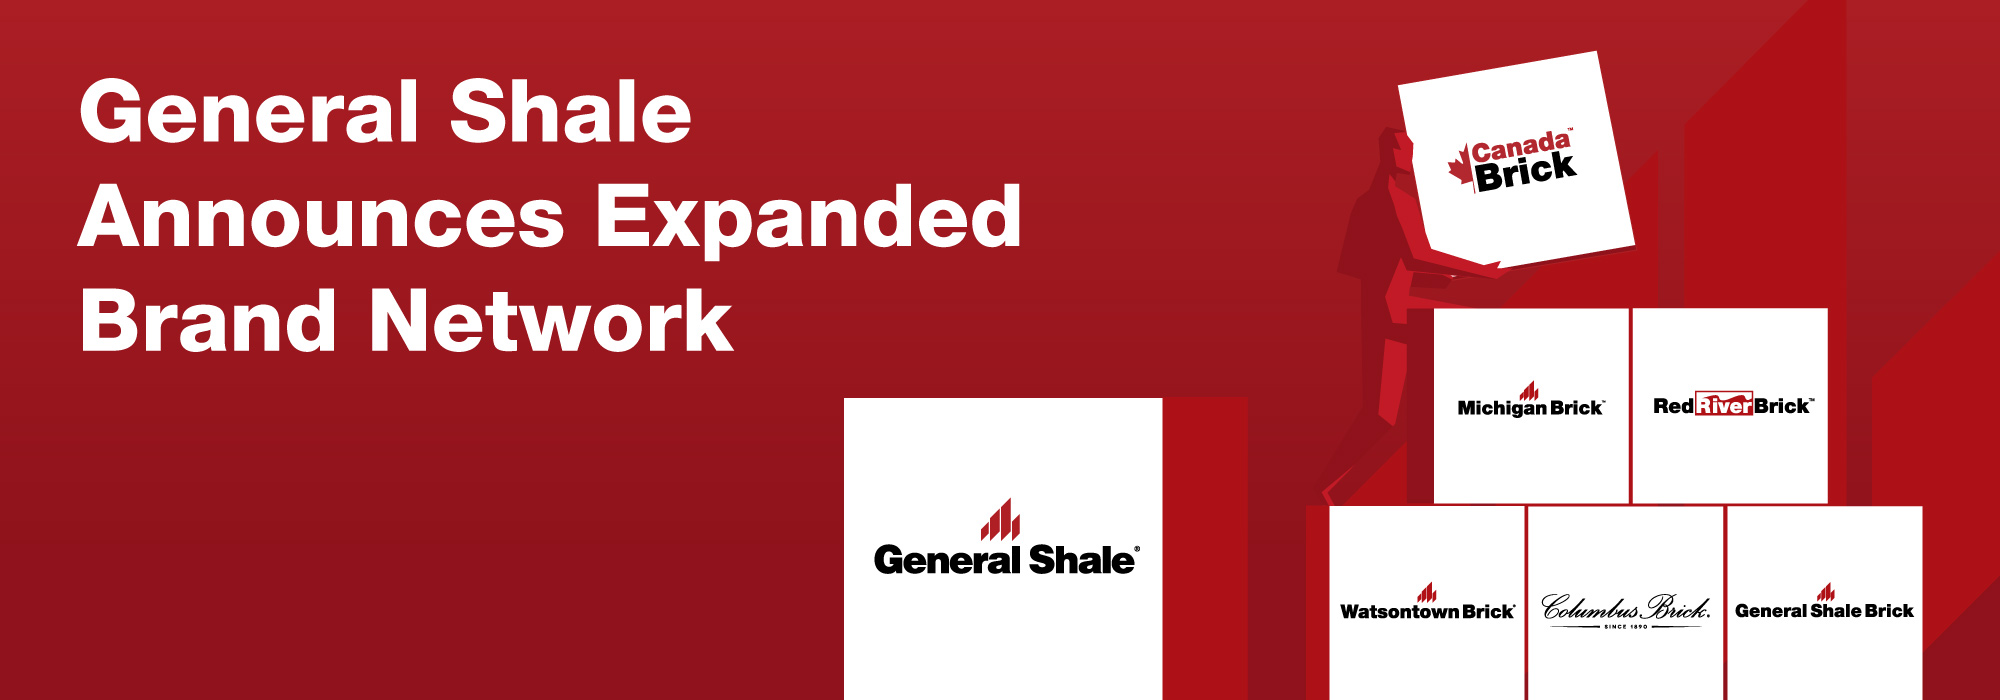 link to PDF - General Shale completes acquisition of Meridian Brick